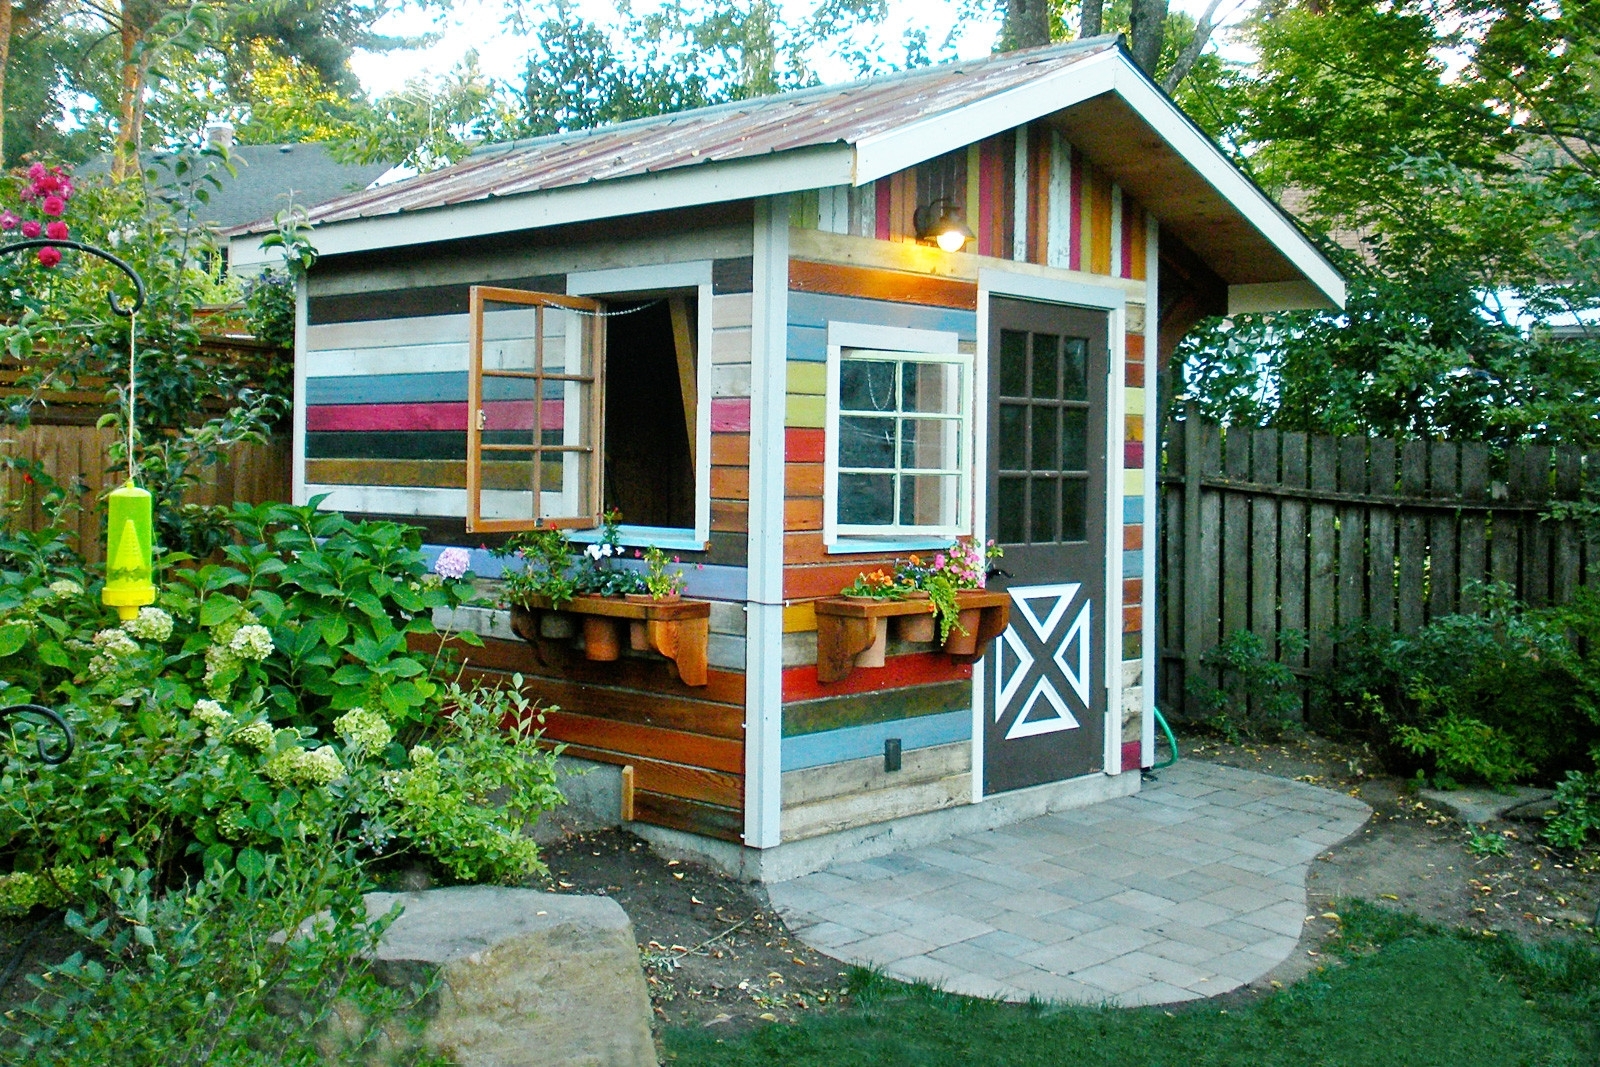 Storage Sheds Turned Into Homes / A Garden Shed Is Transformed Into A ...